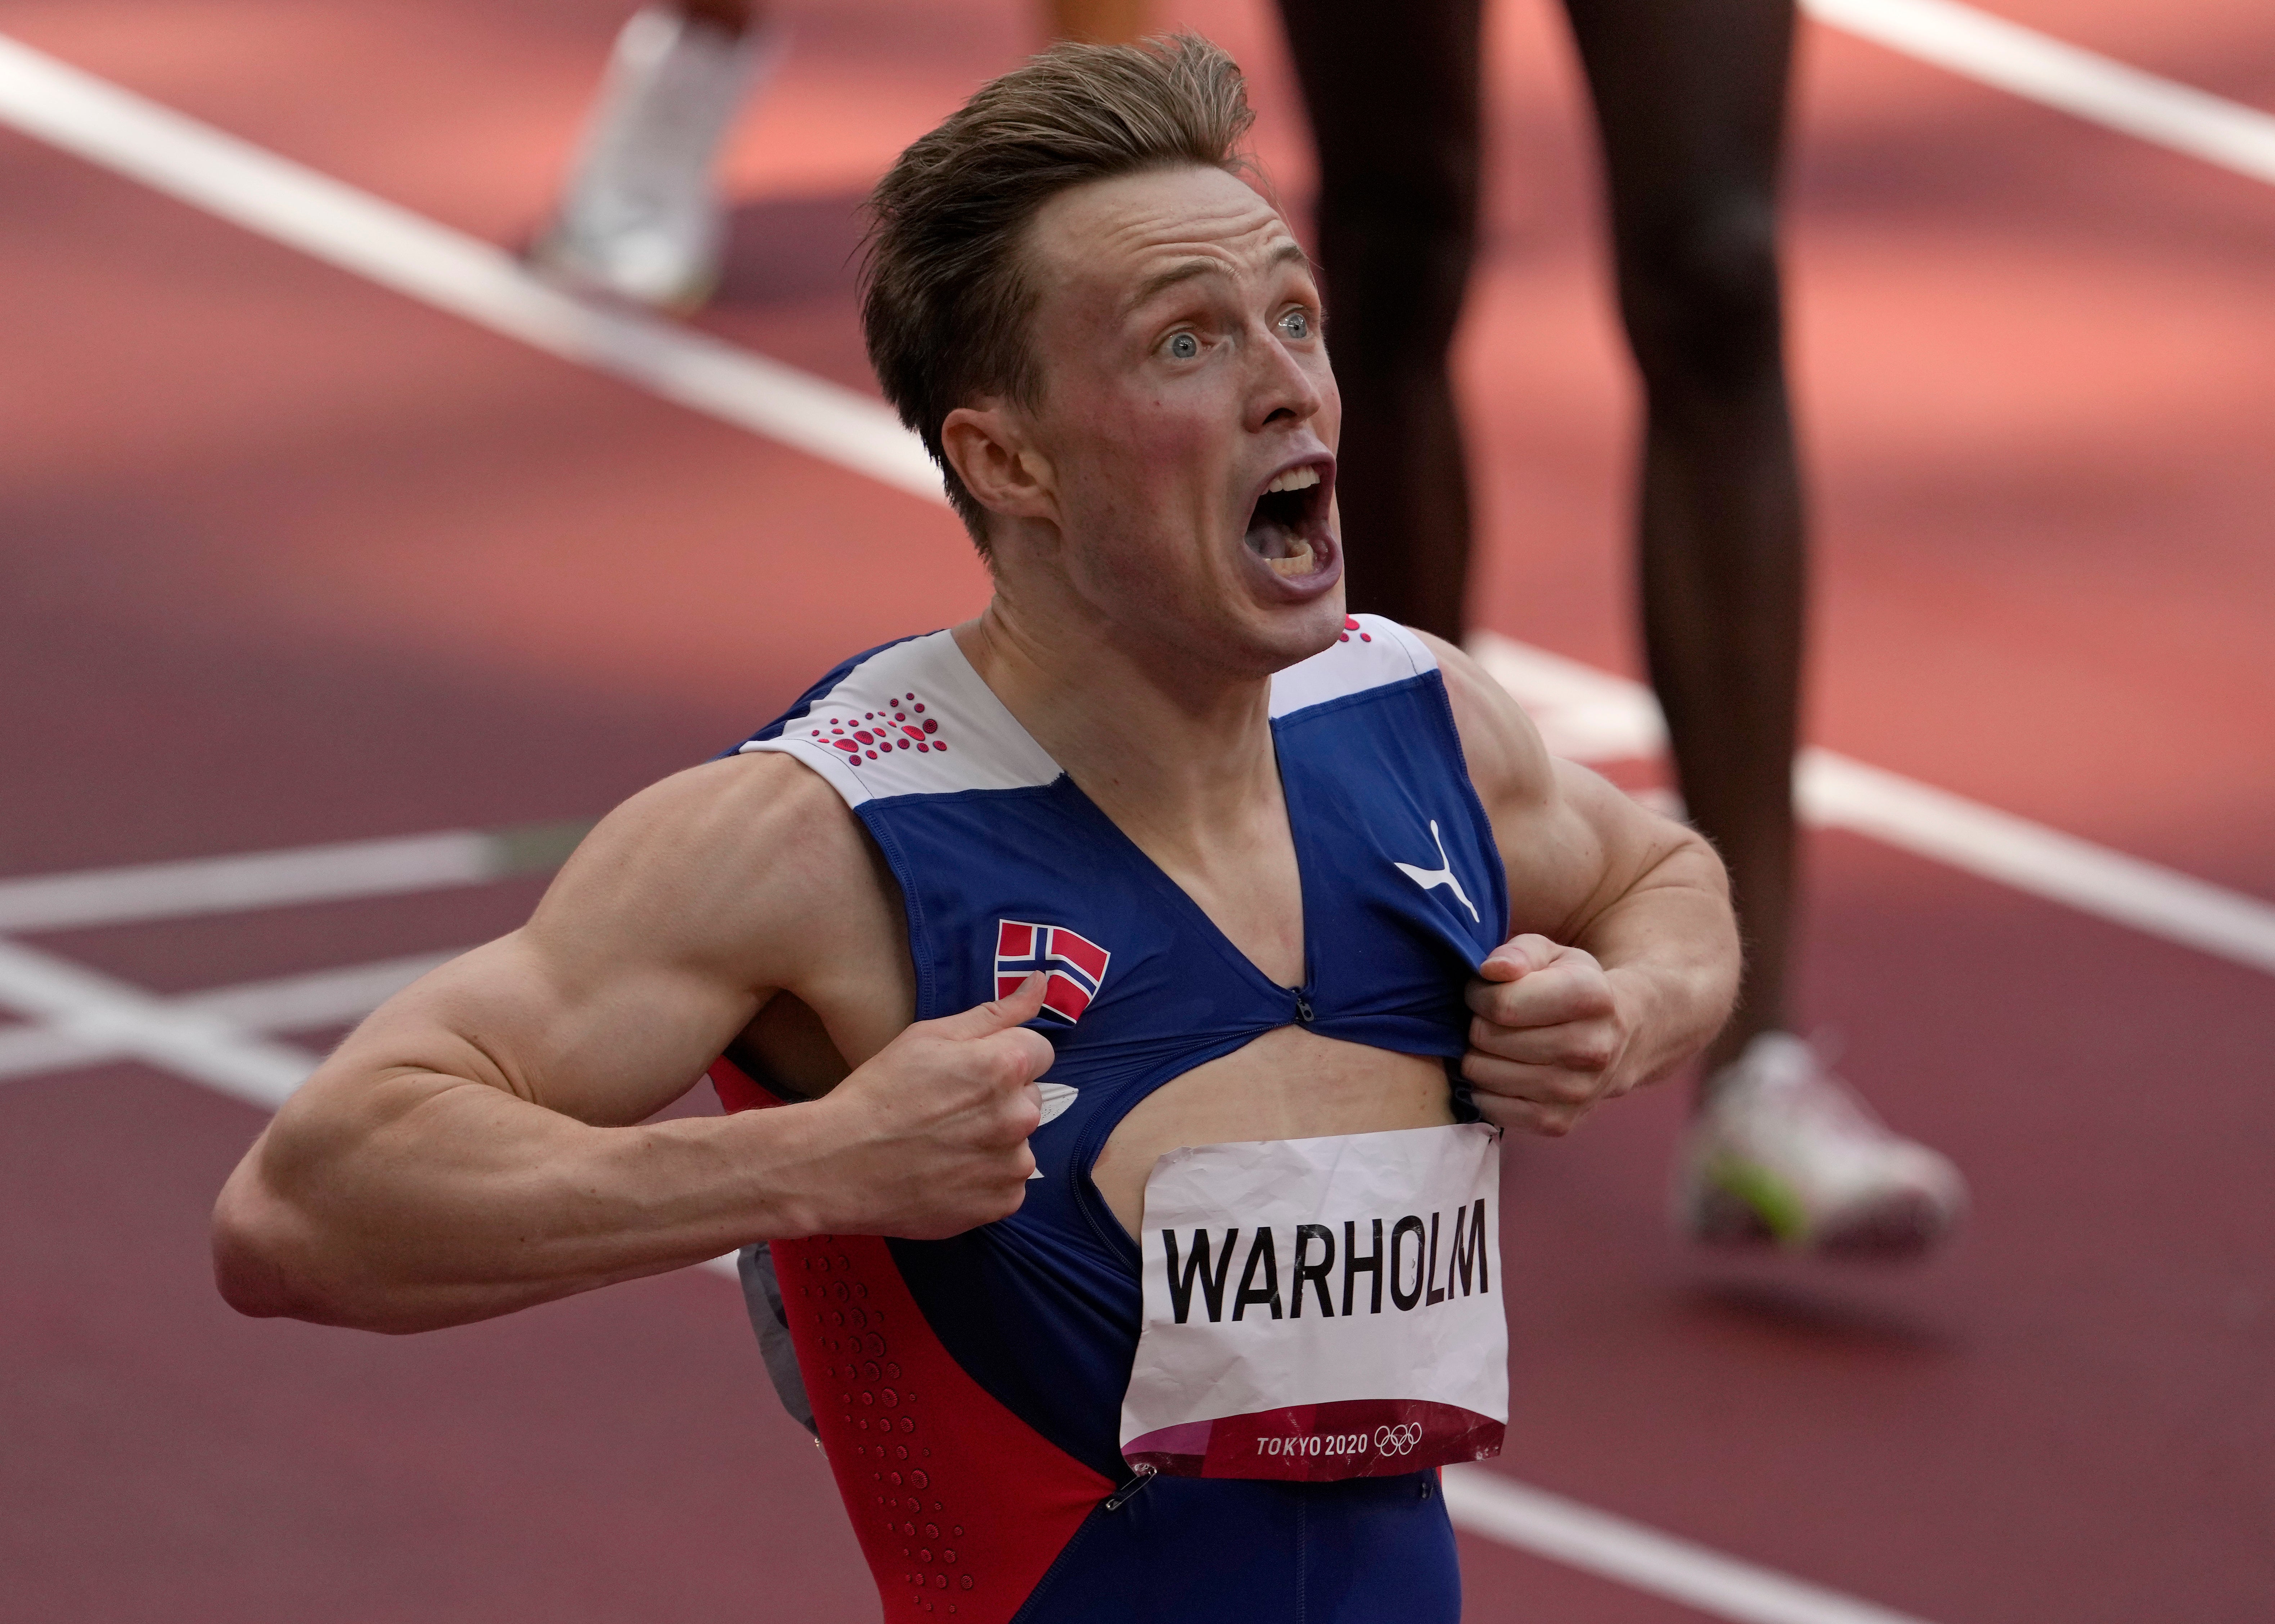 Warholm reacts after breaking the world record to win gold in Tokyo